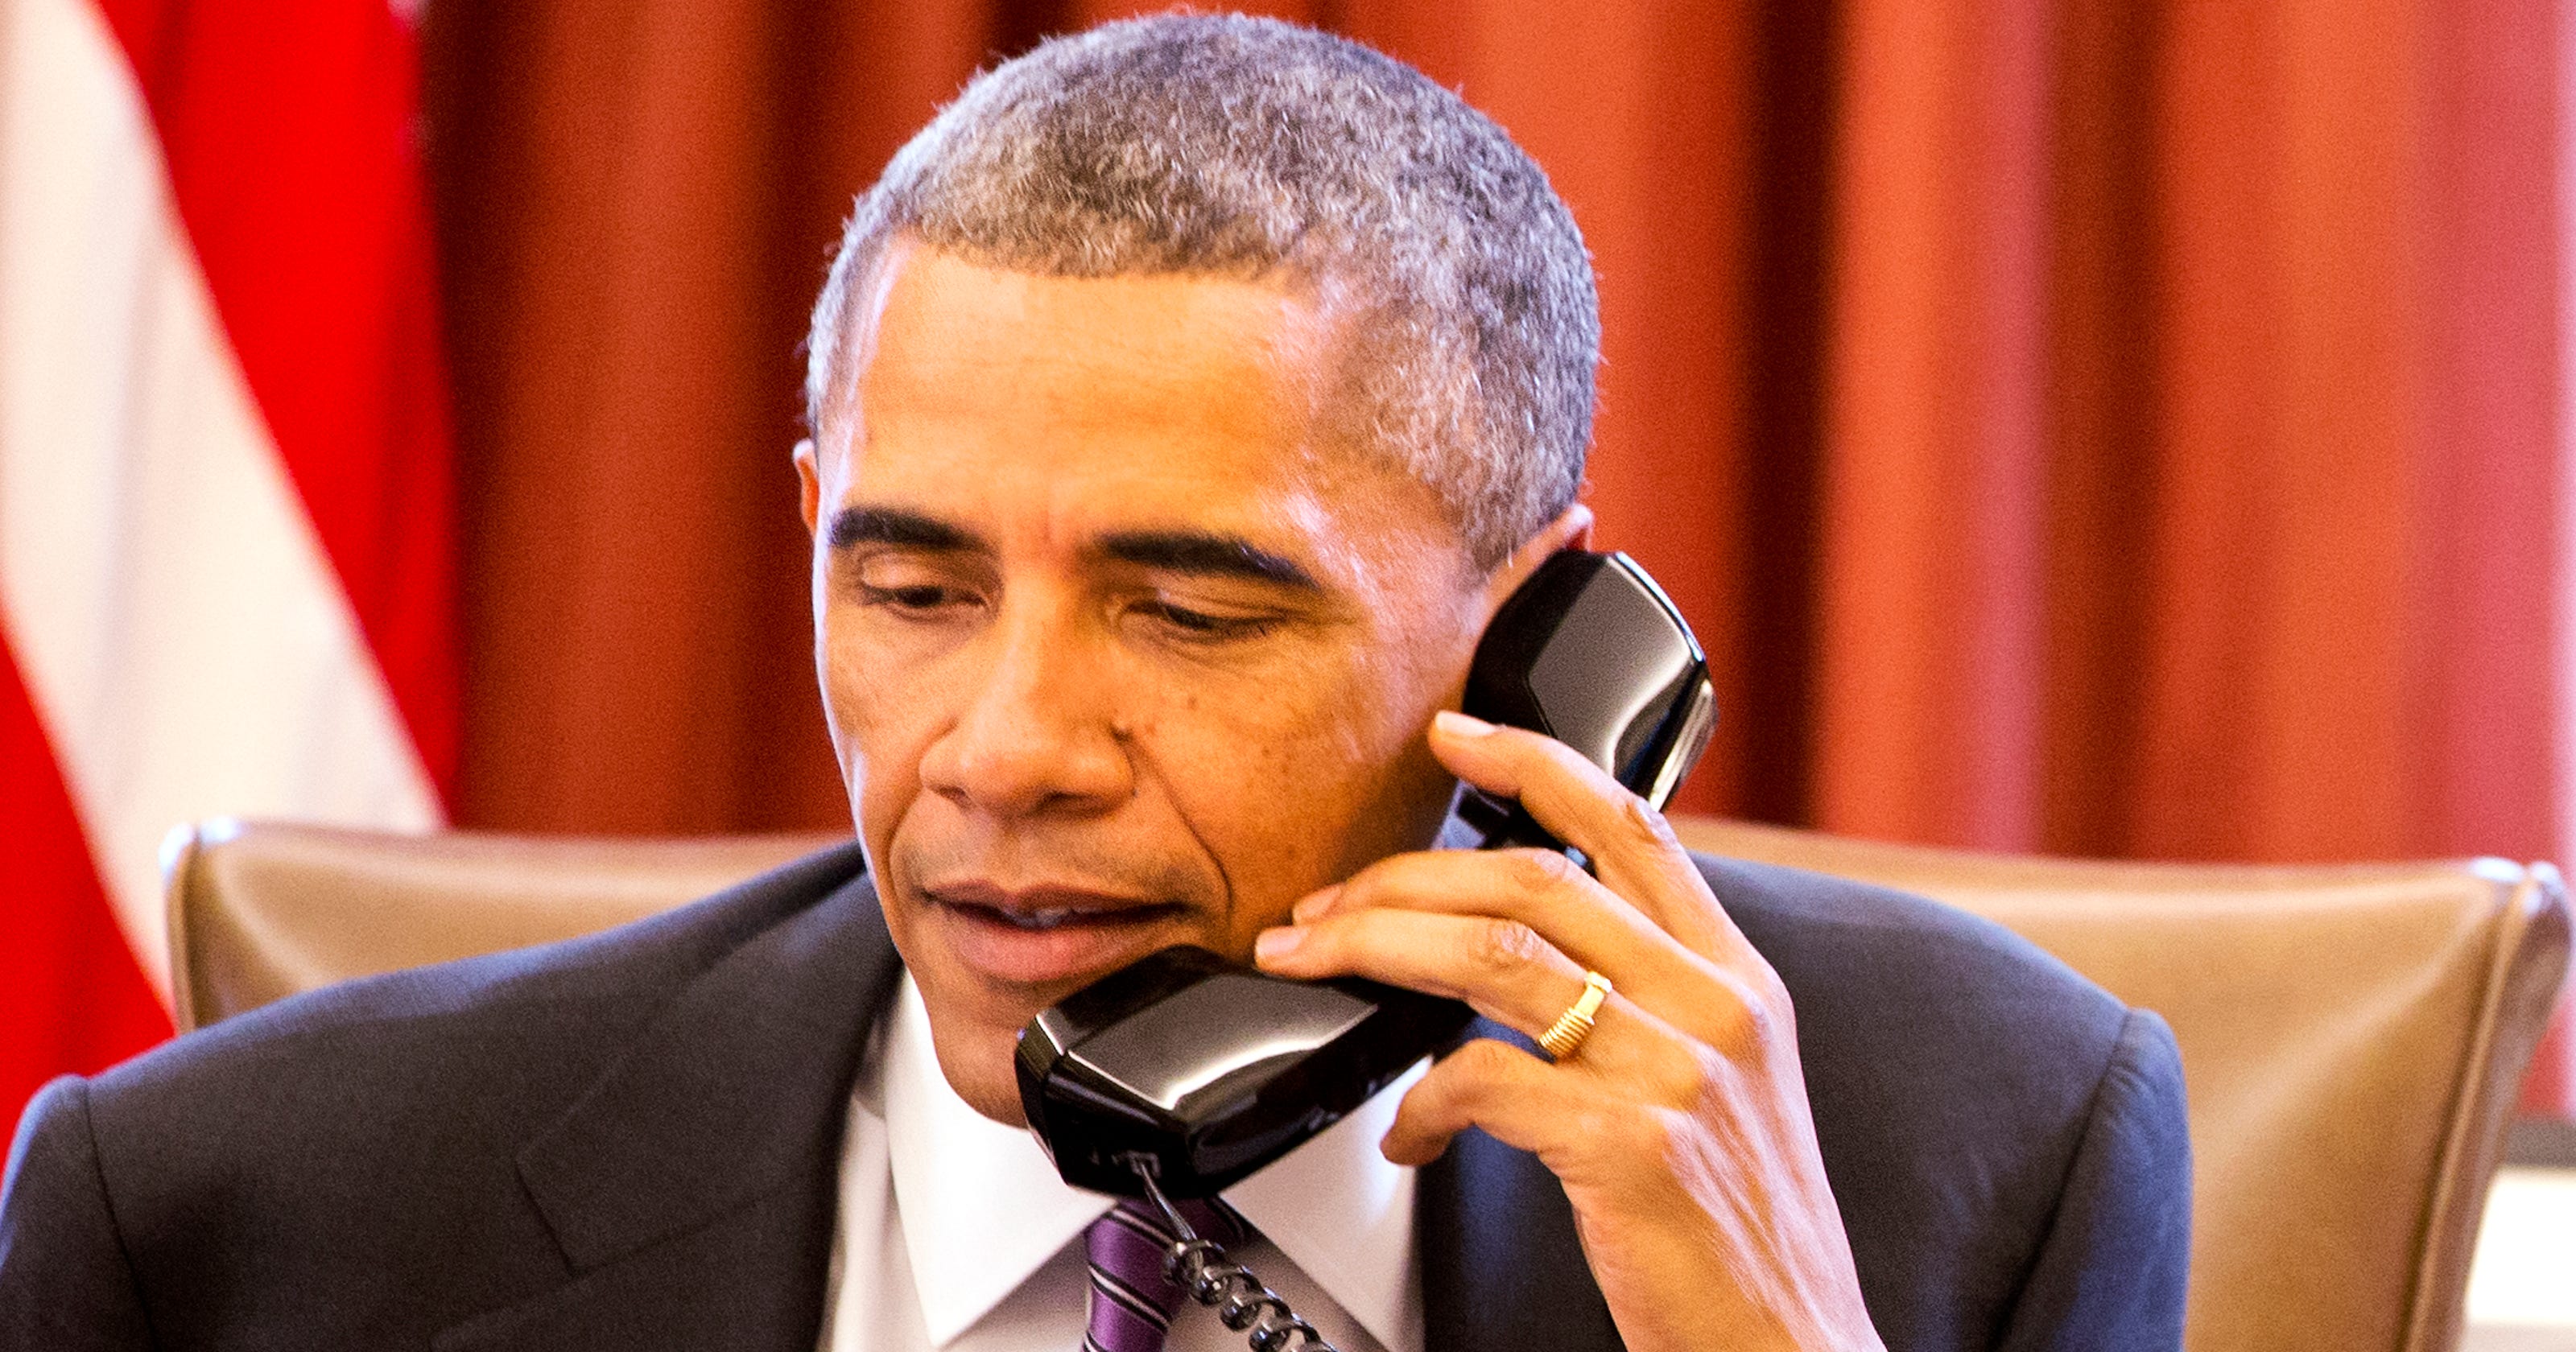 Obama has same phone conversation with two different world leaders